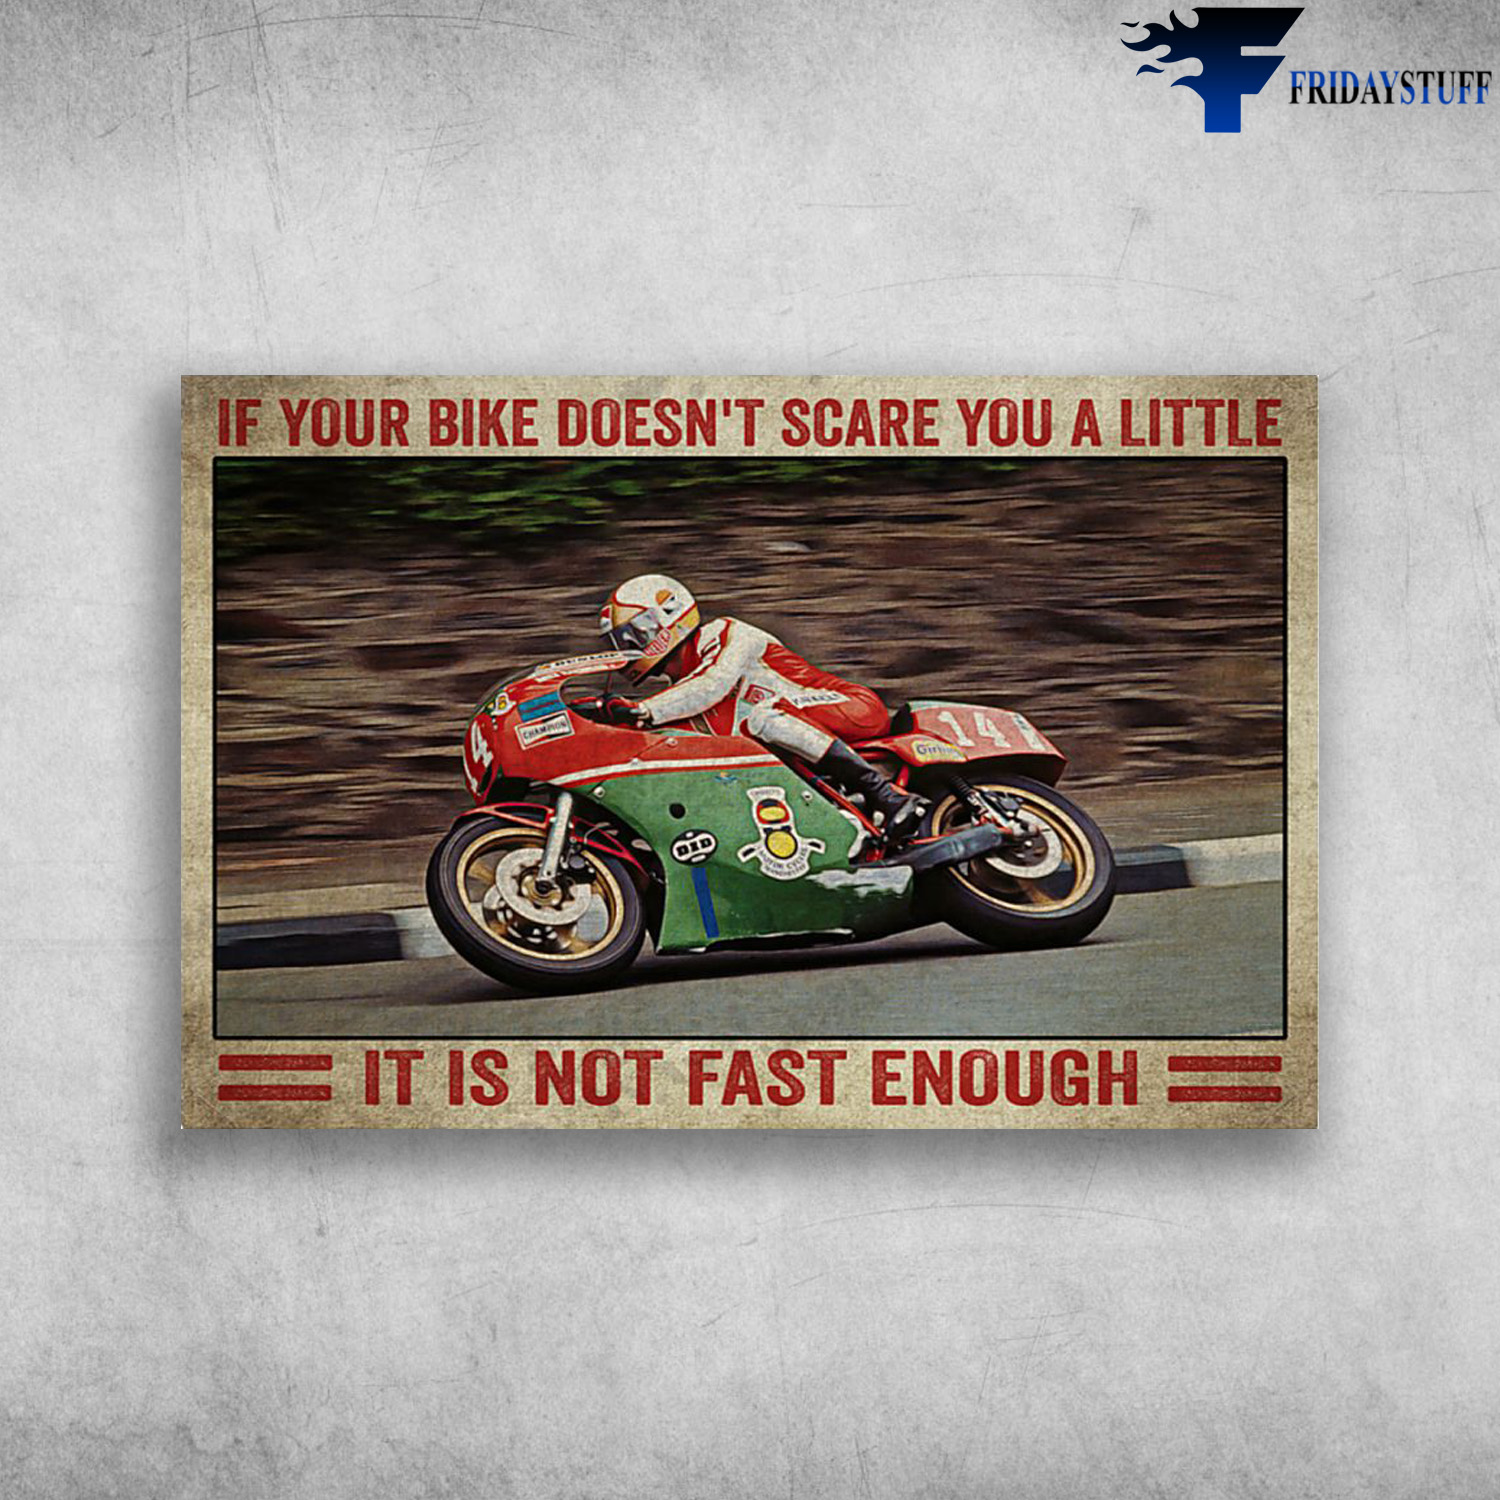 Biker Motorcycle - If You Bike Doesn't Scare You A Little, It Is Not Fast Enough